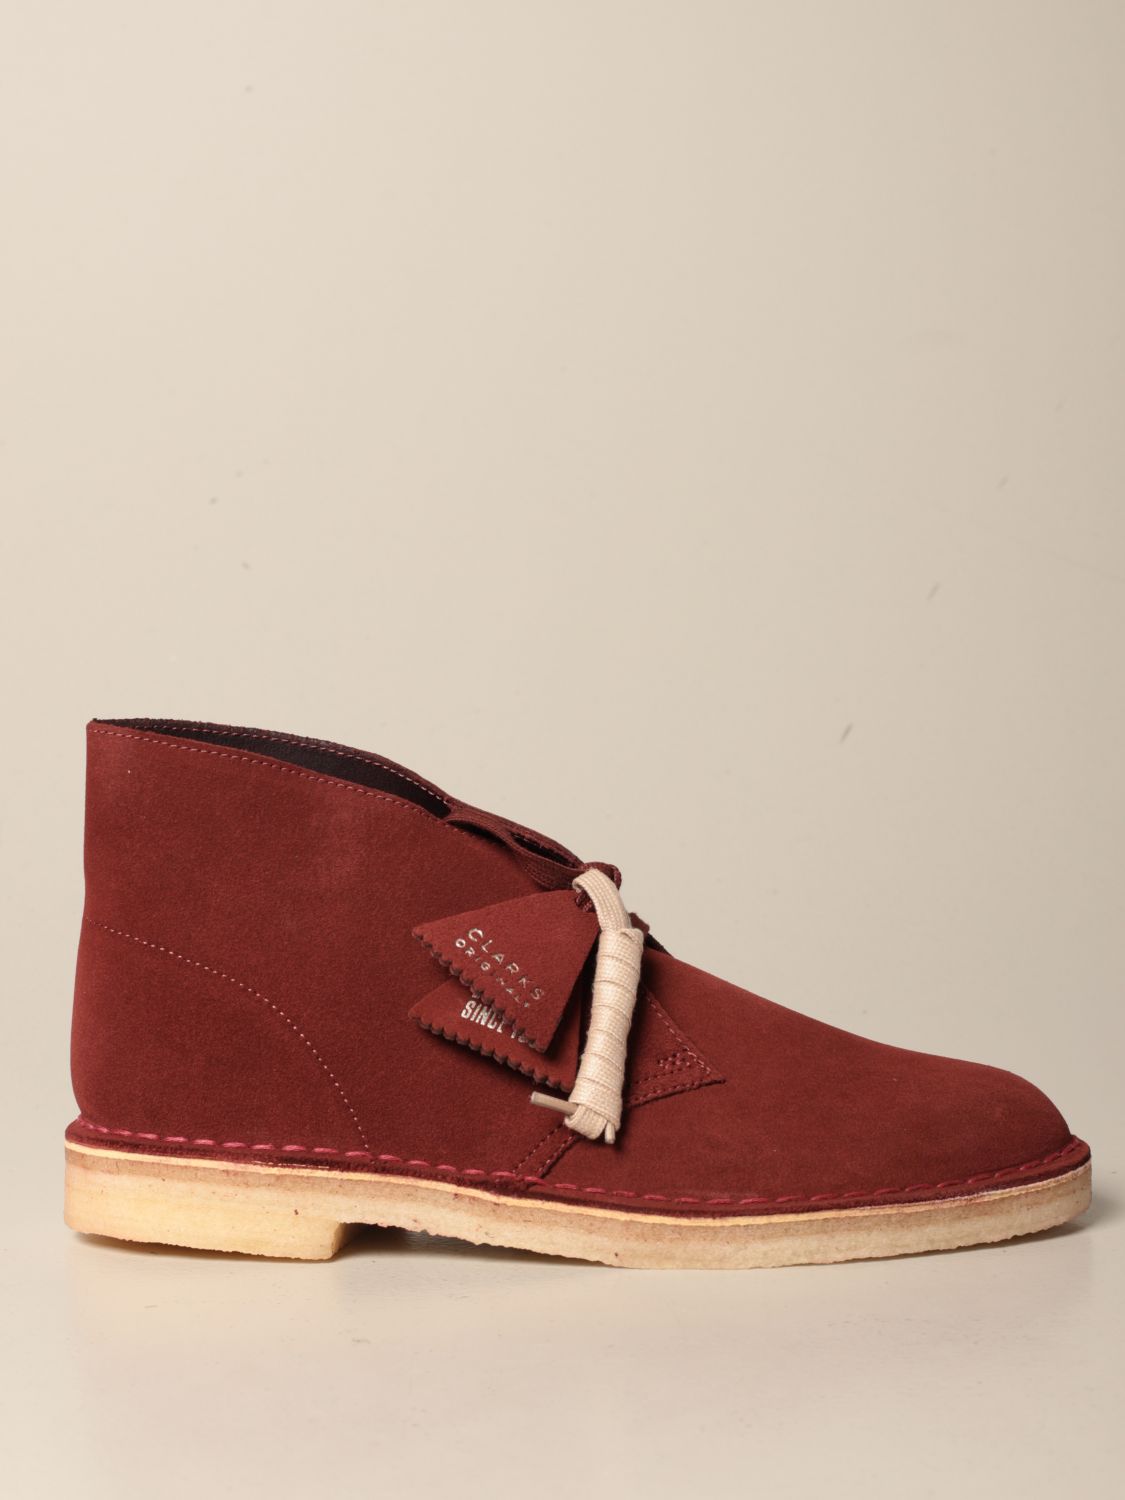 clarks suede chukka boots